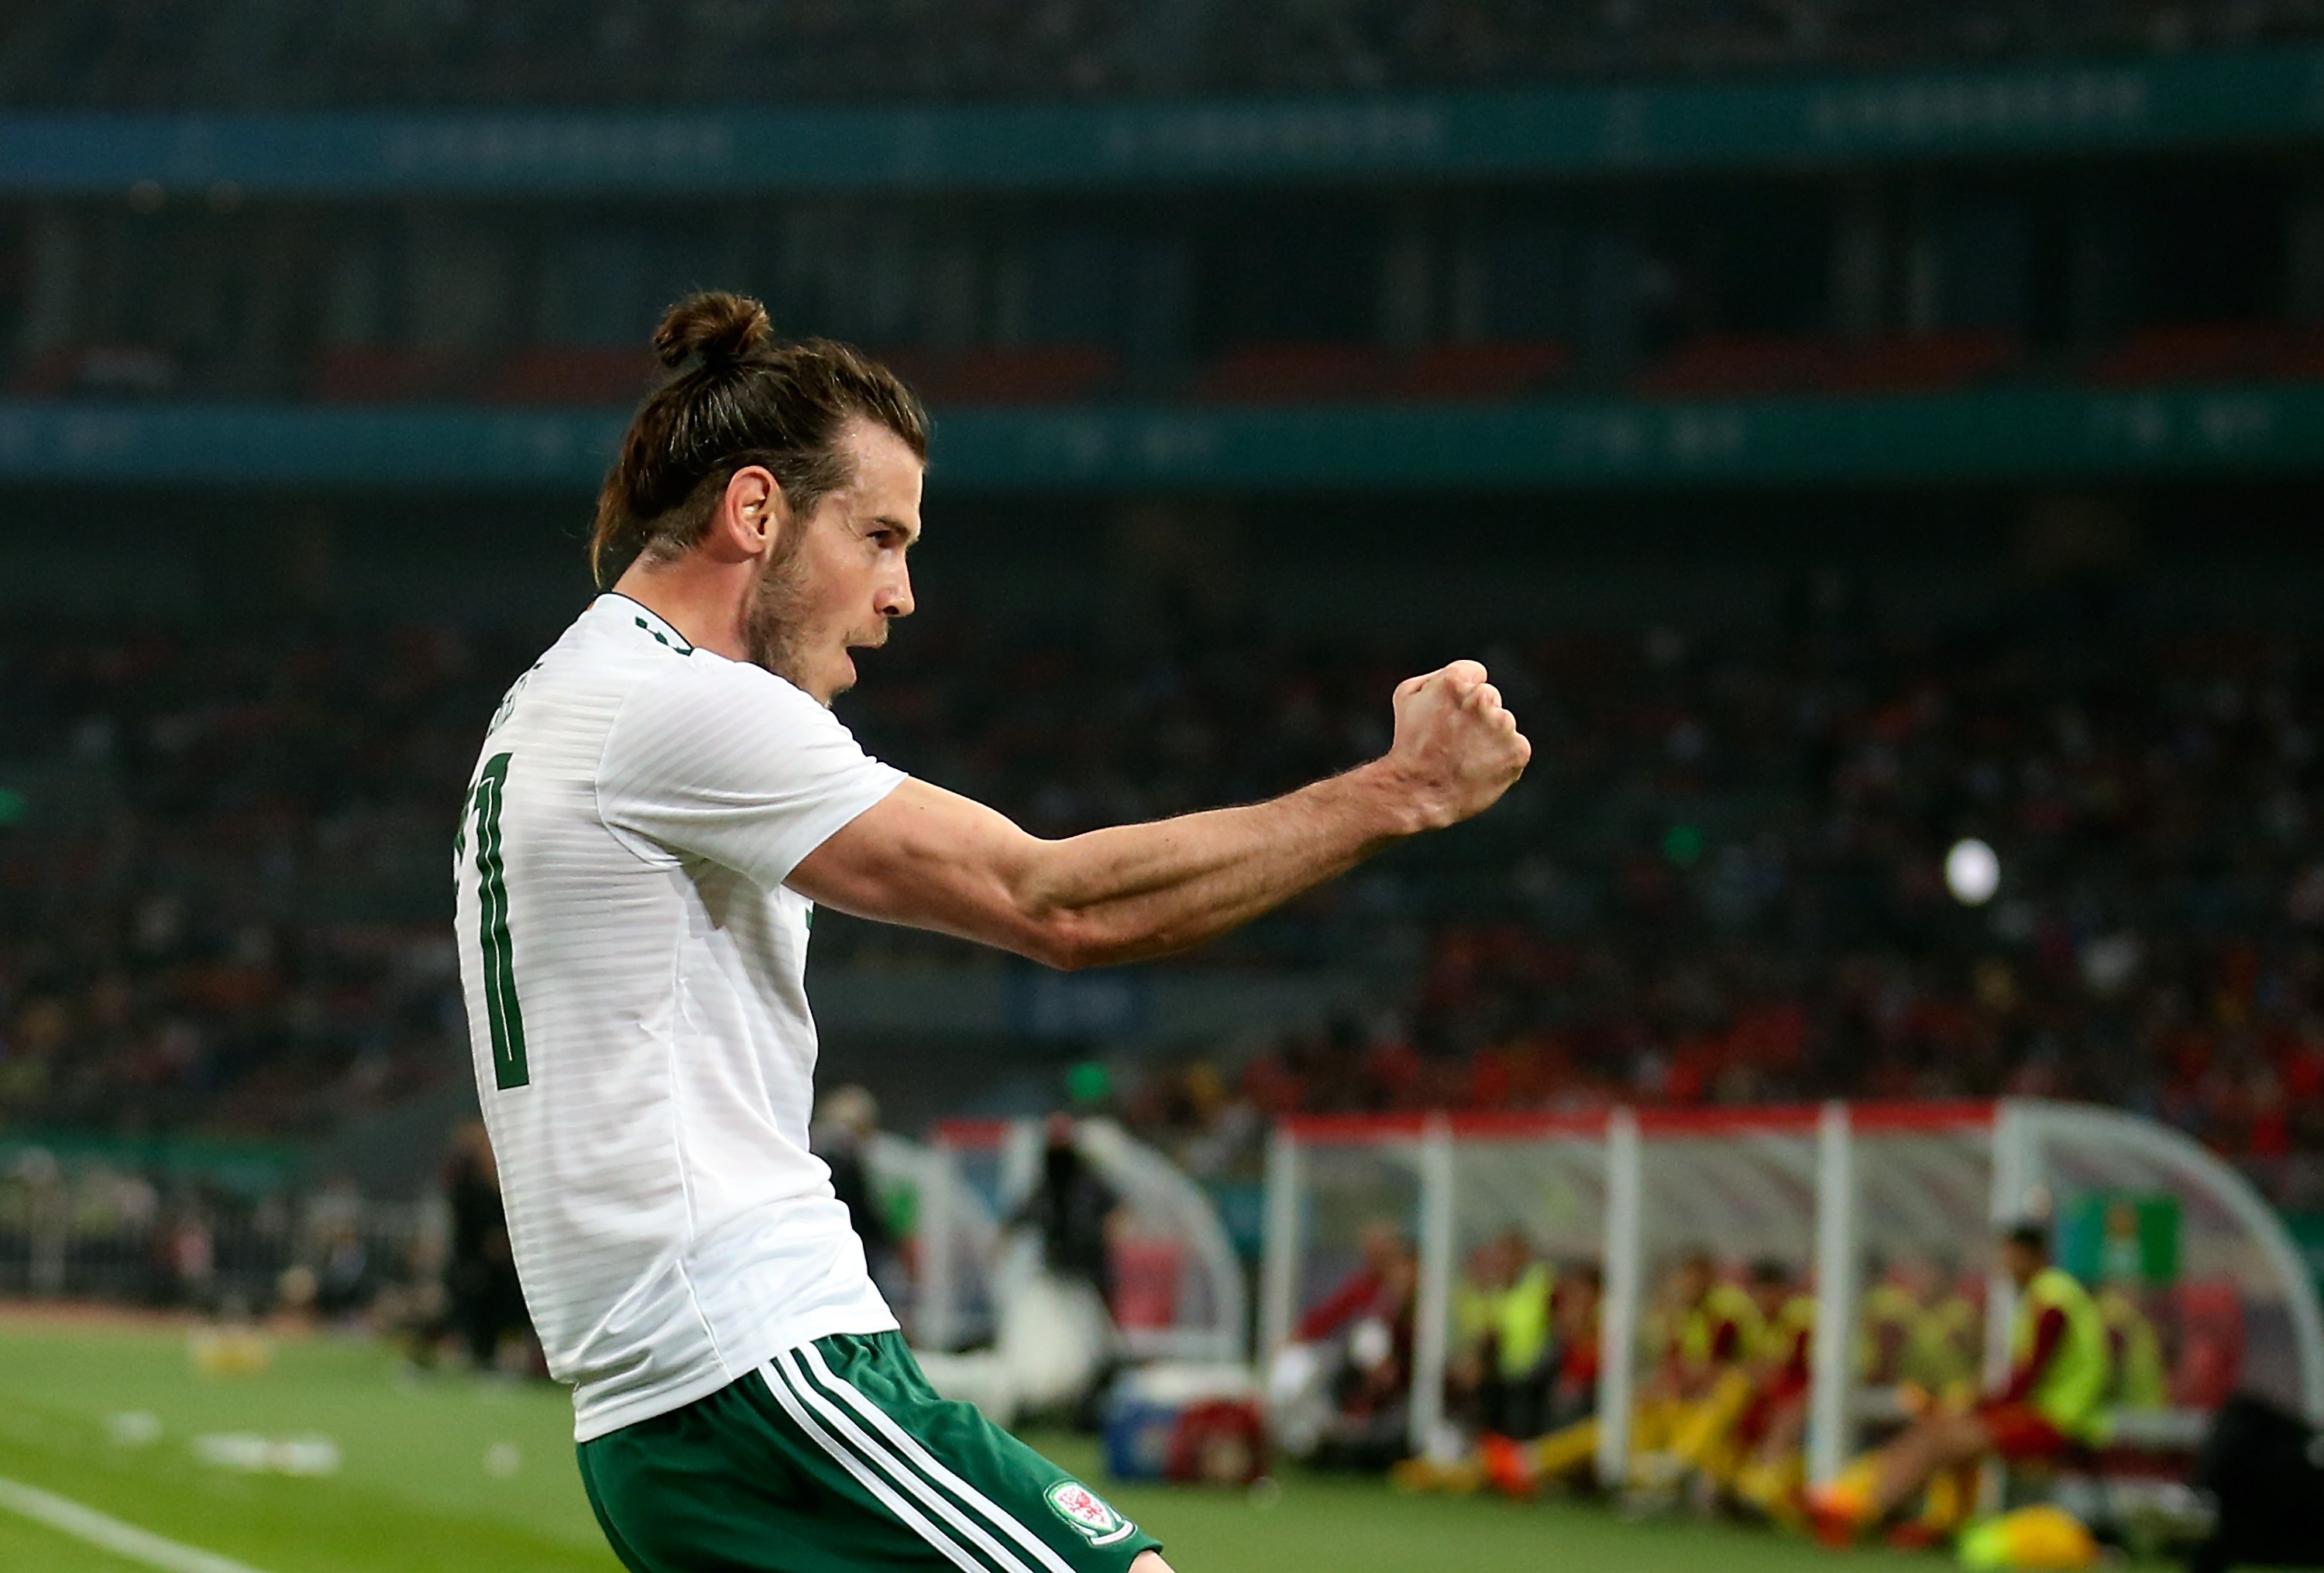 Gareth Bale’s hat-trick was the highlight of an interesting night in Nanning. Photos: Xinhua社记者曹灿摄